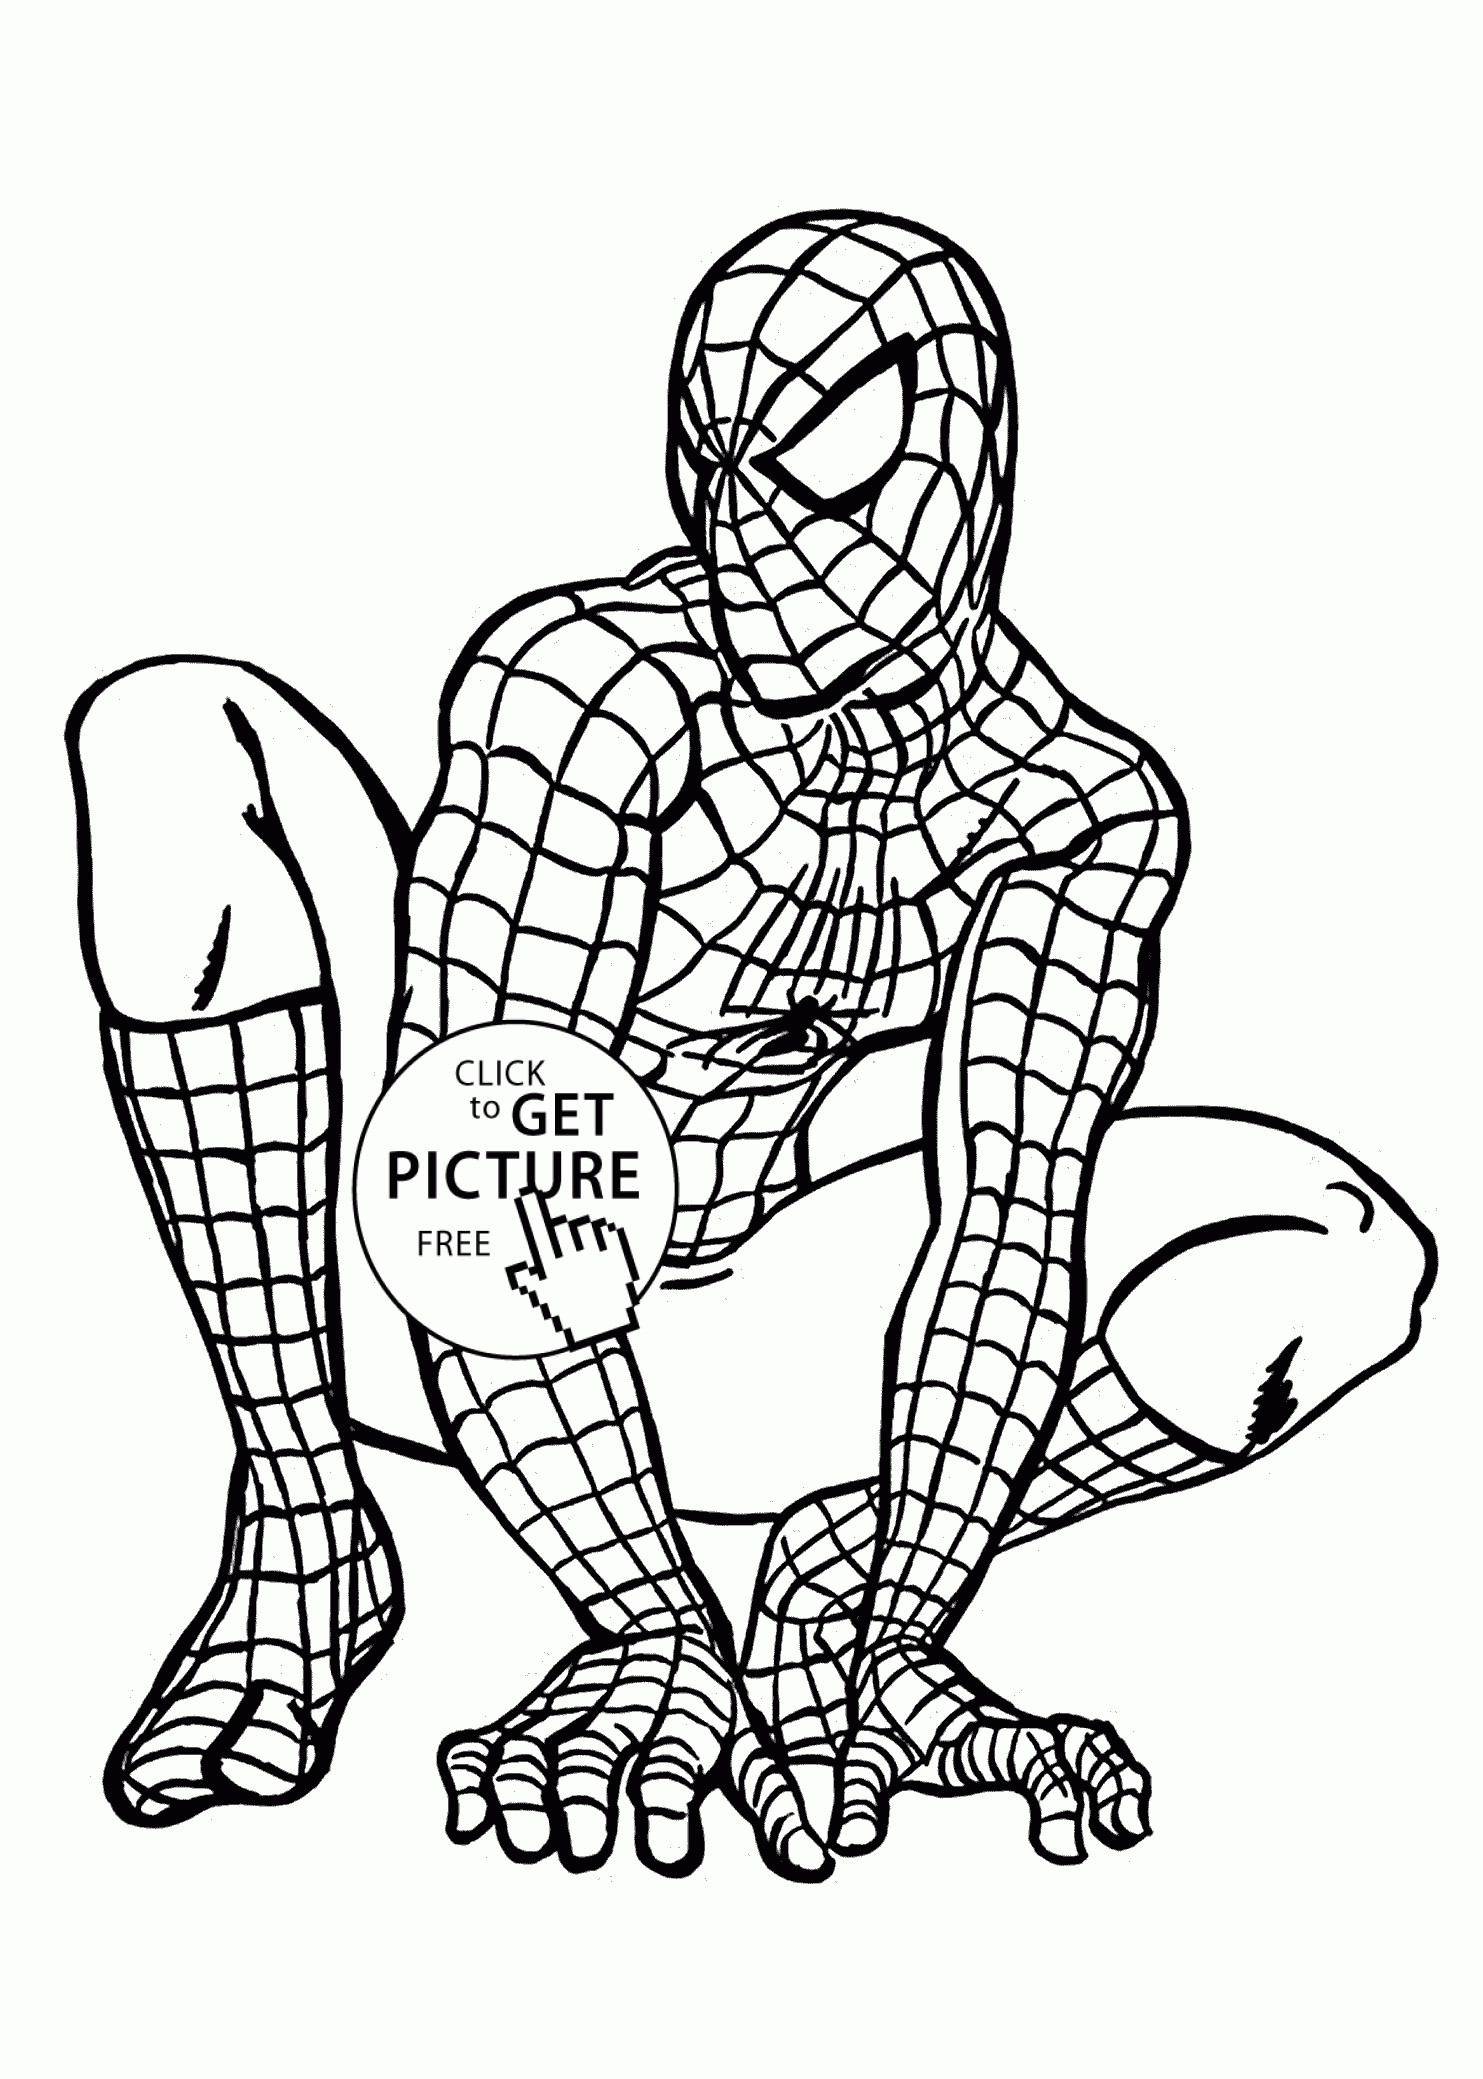 Spider Man Coloring Pages For Kids Printable Free | Coloing-4Kids - Free Printable Spiderman Pictures